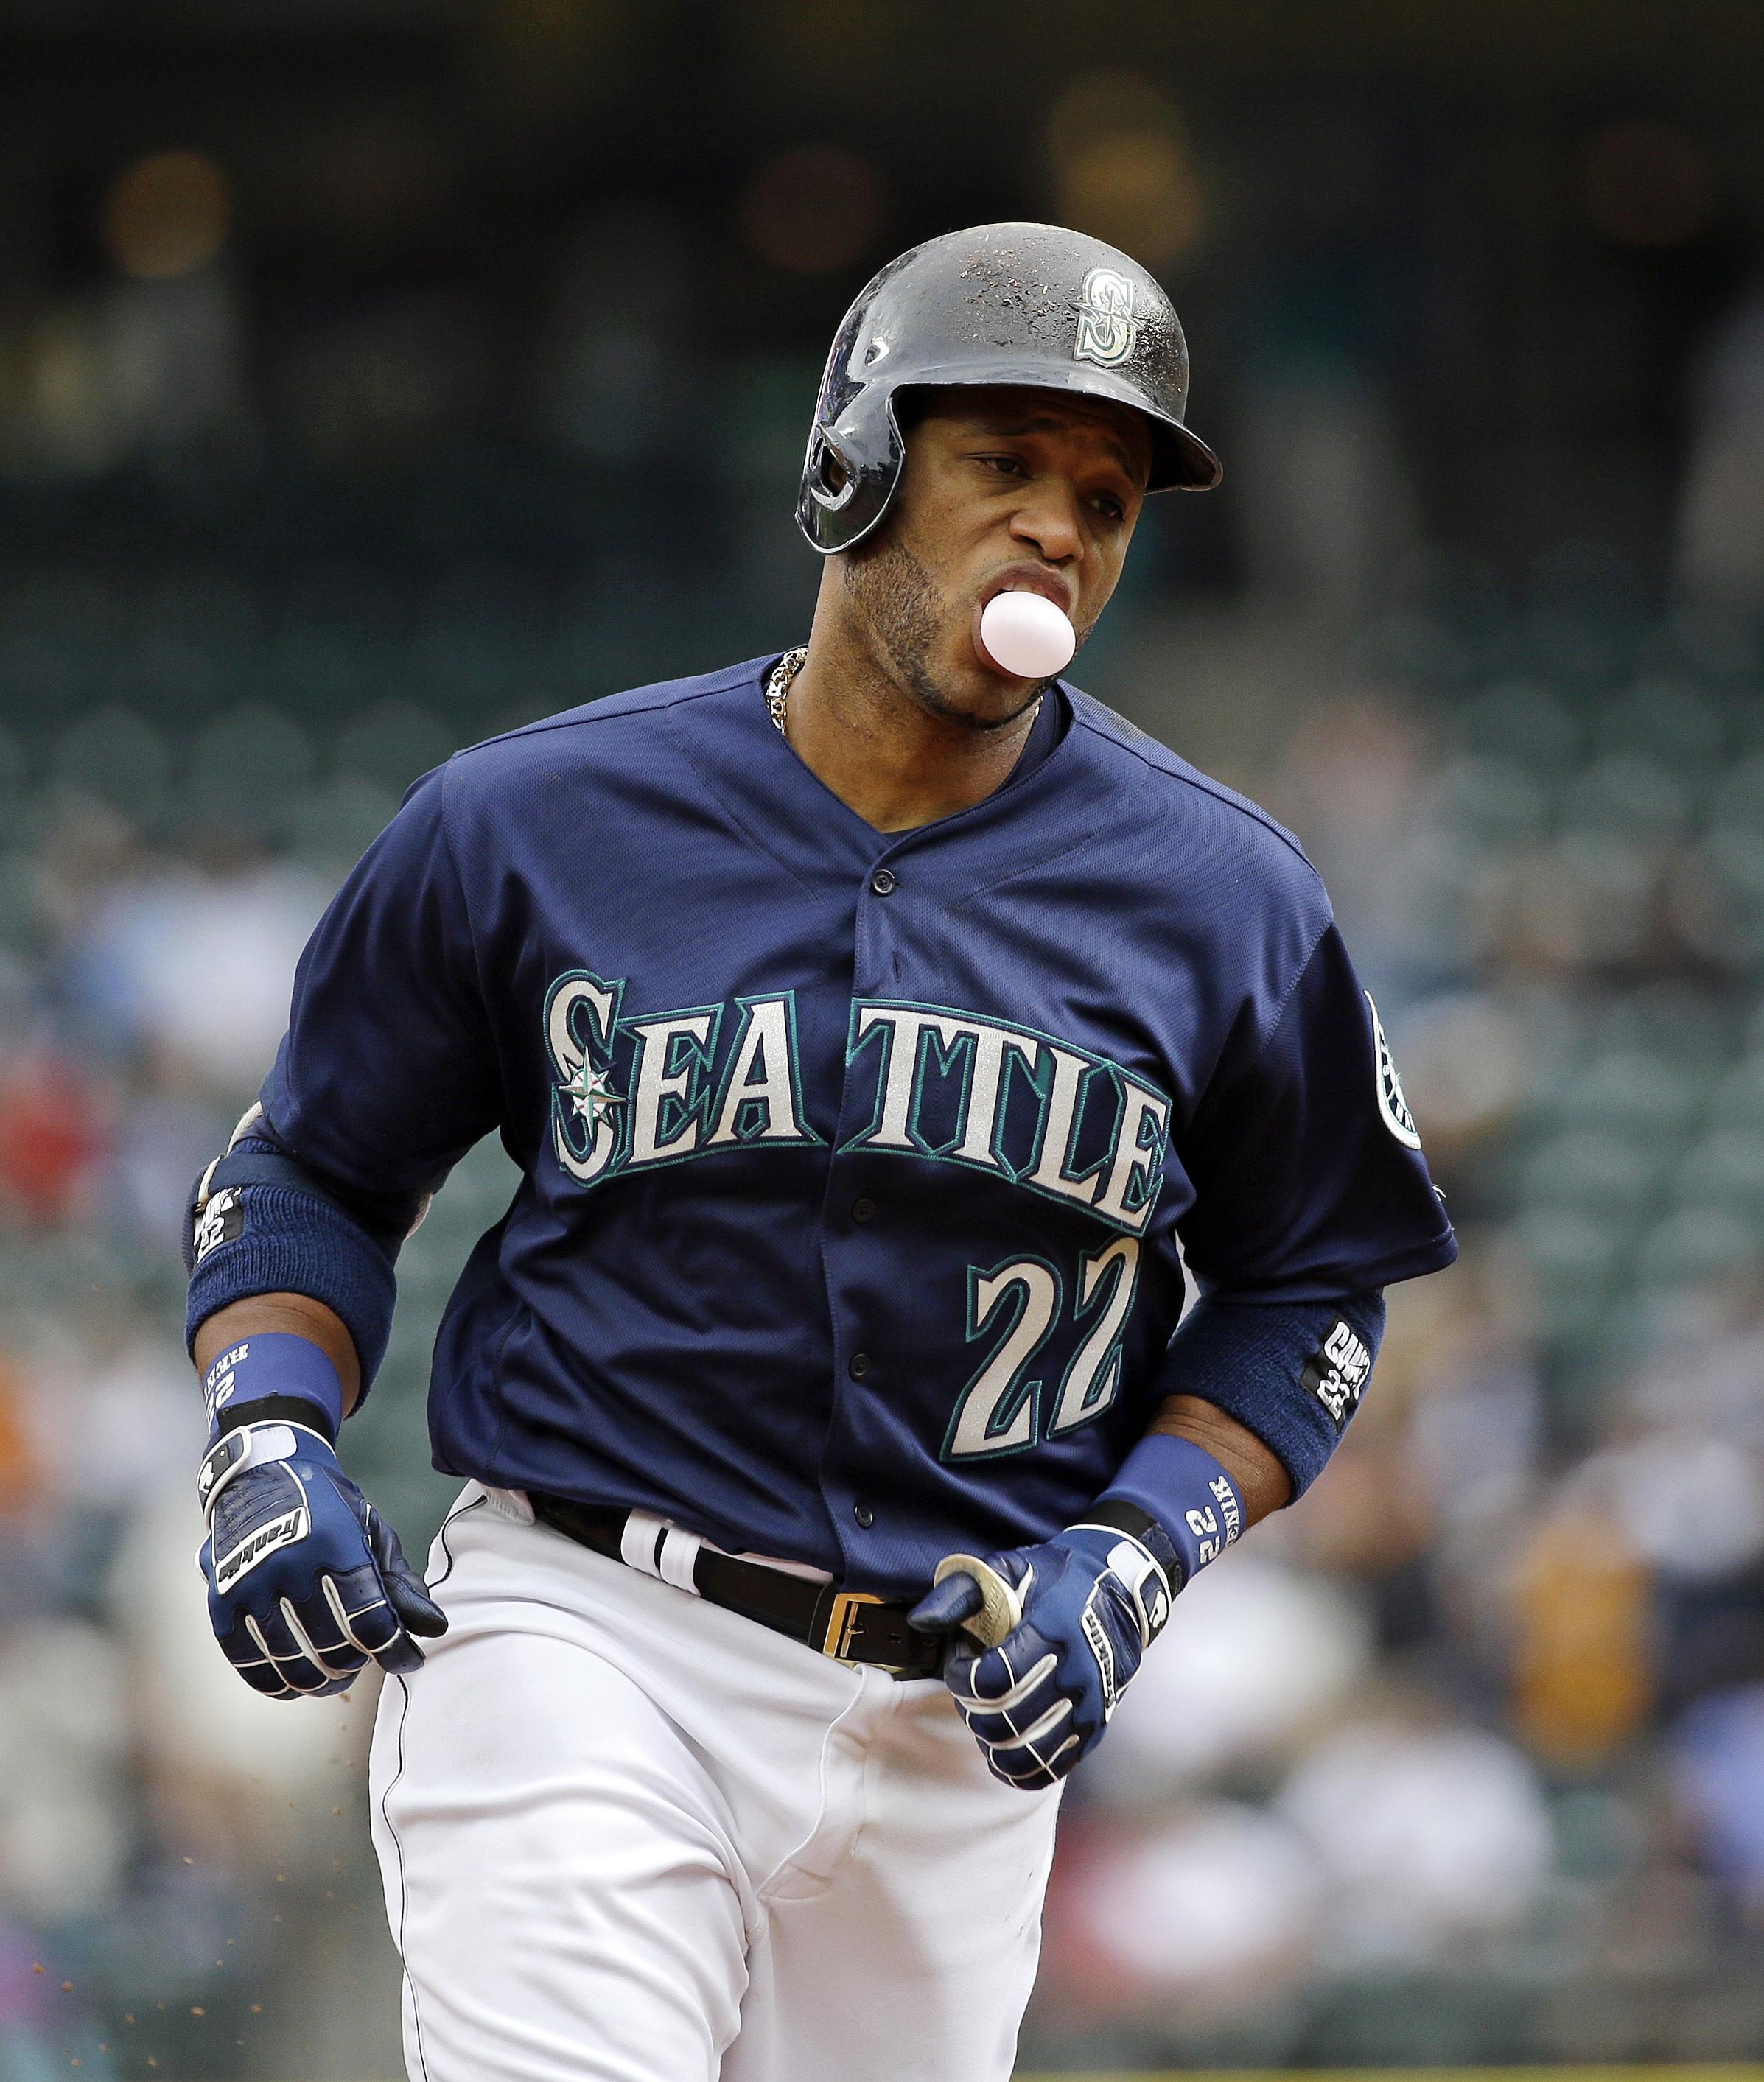 Robinson Cano's 32nd homer gets Mariners started in 14-6 win over Rangers